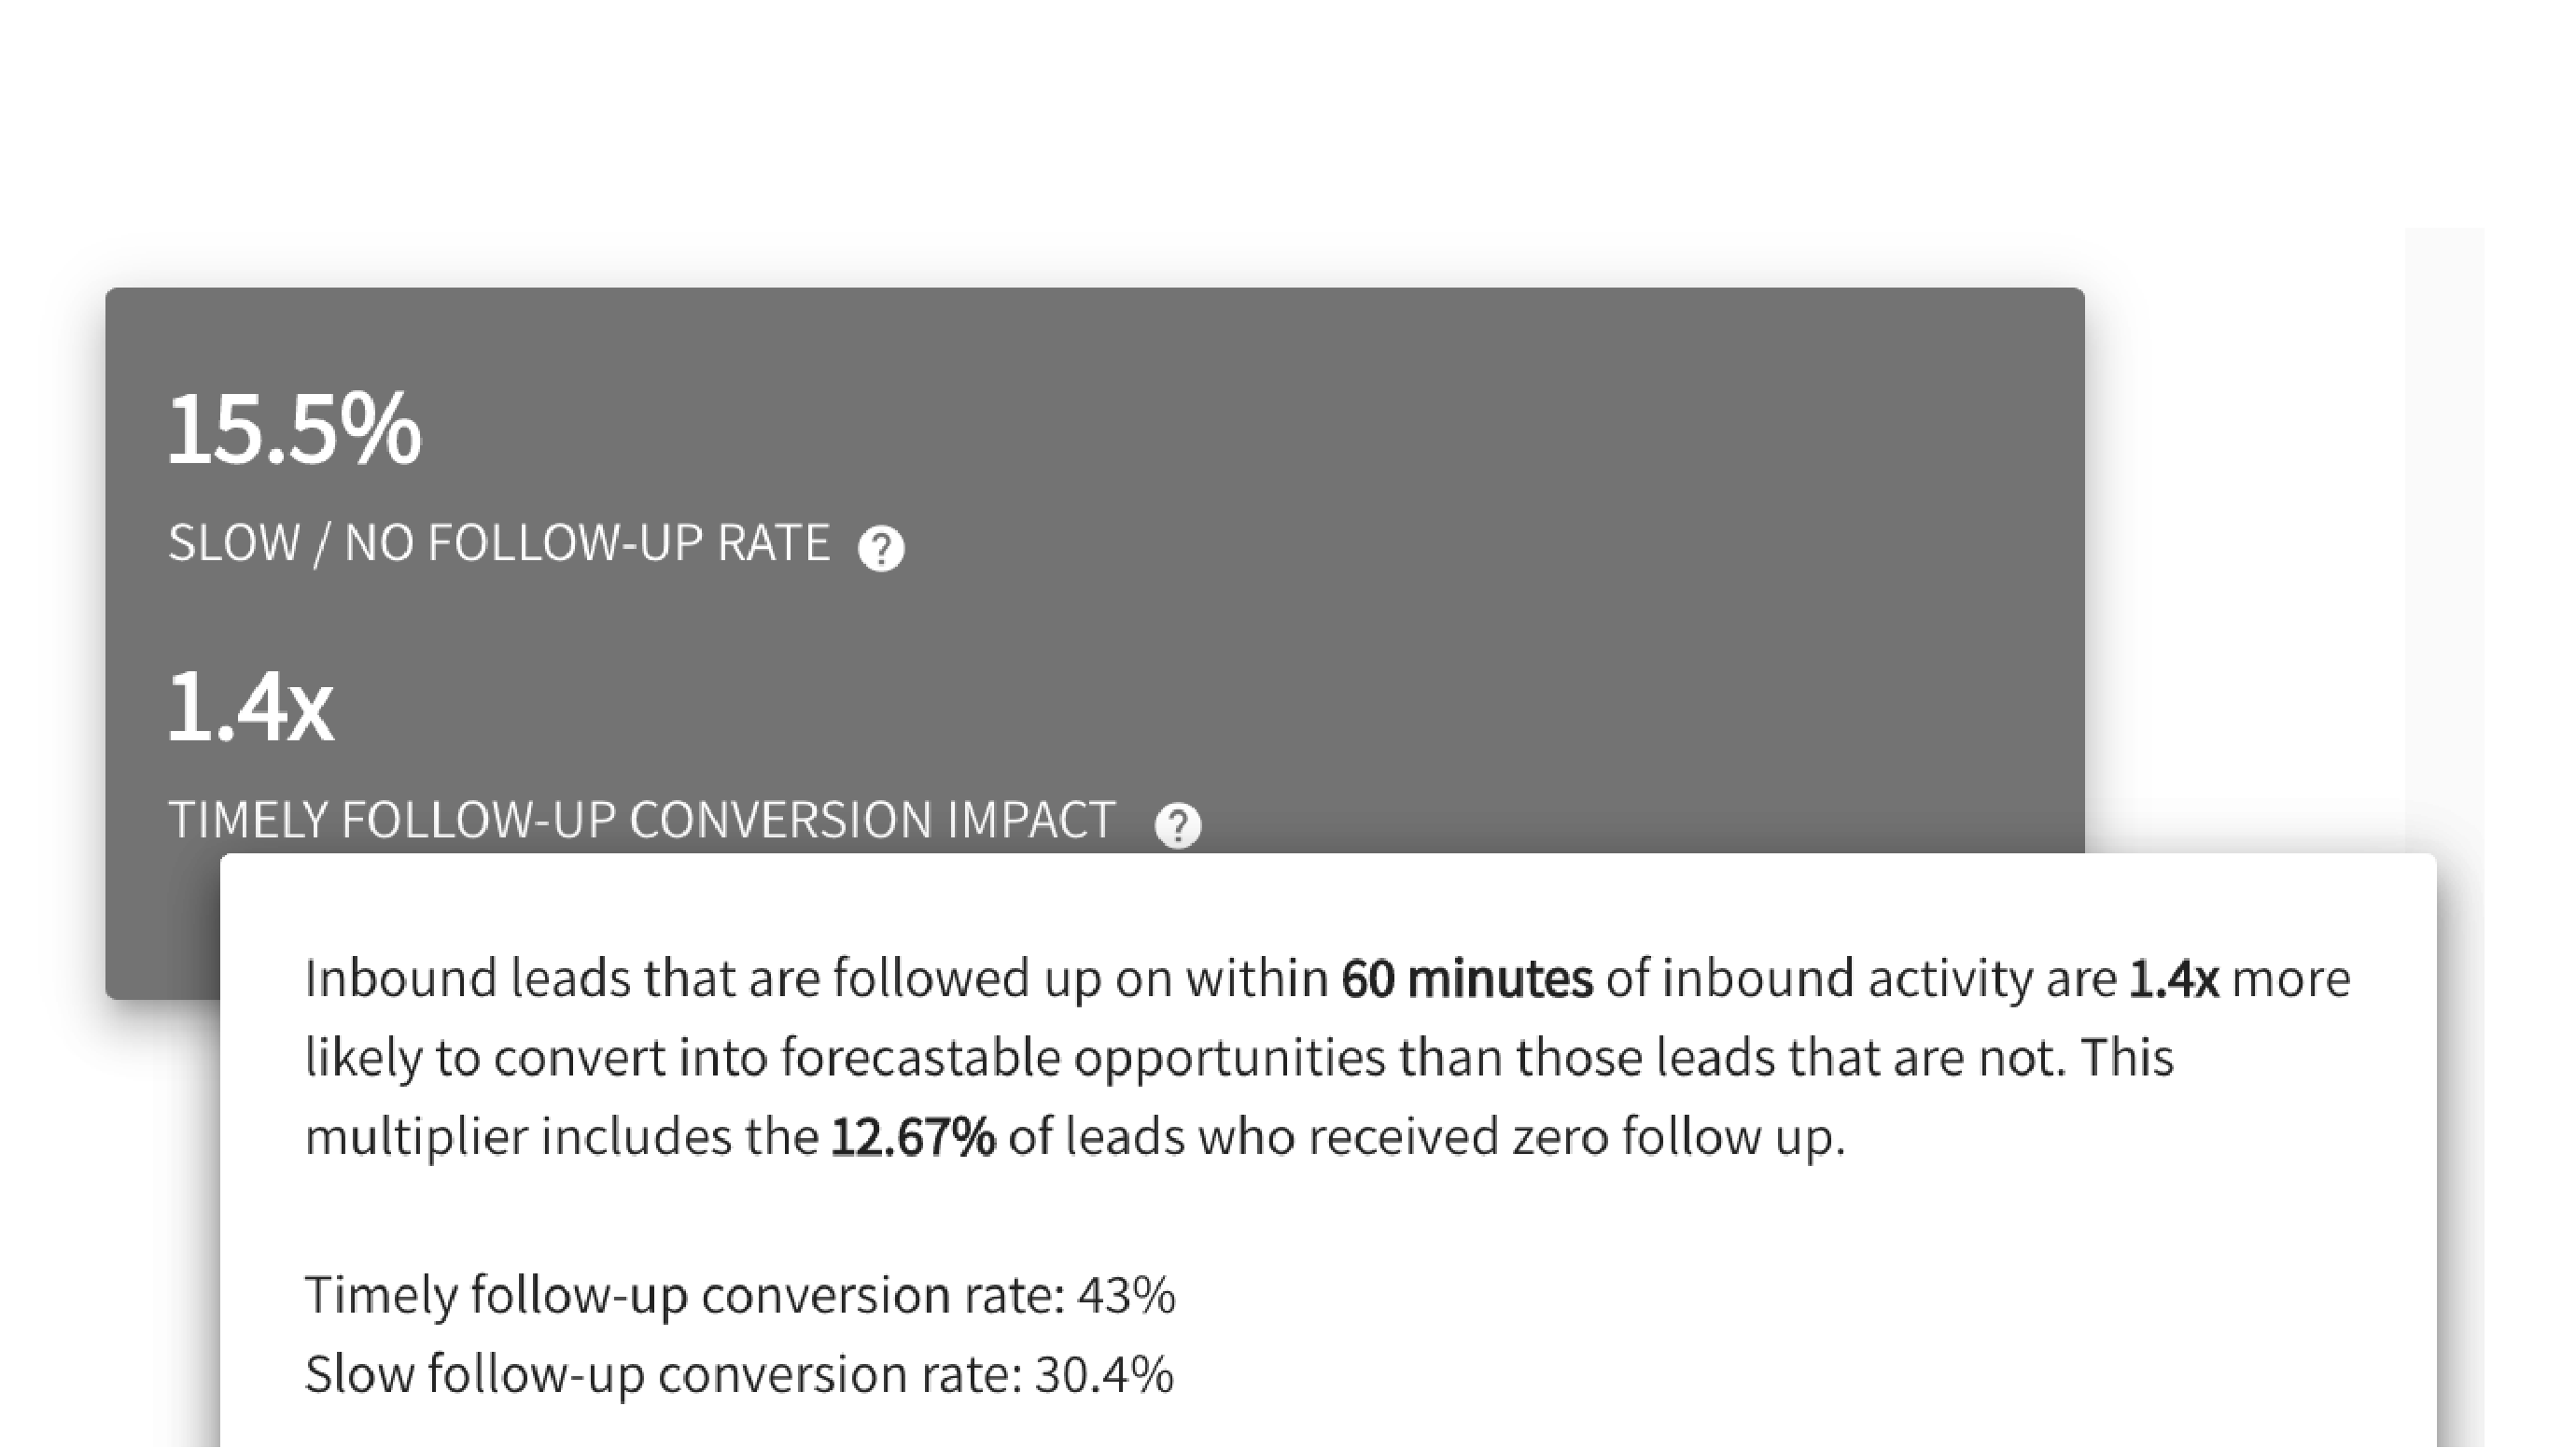 Inbound Lead Timely Follow-up Effect on Conversion